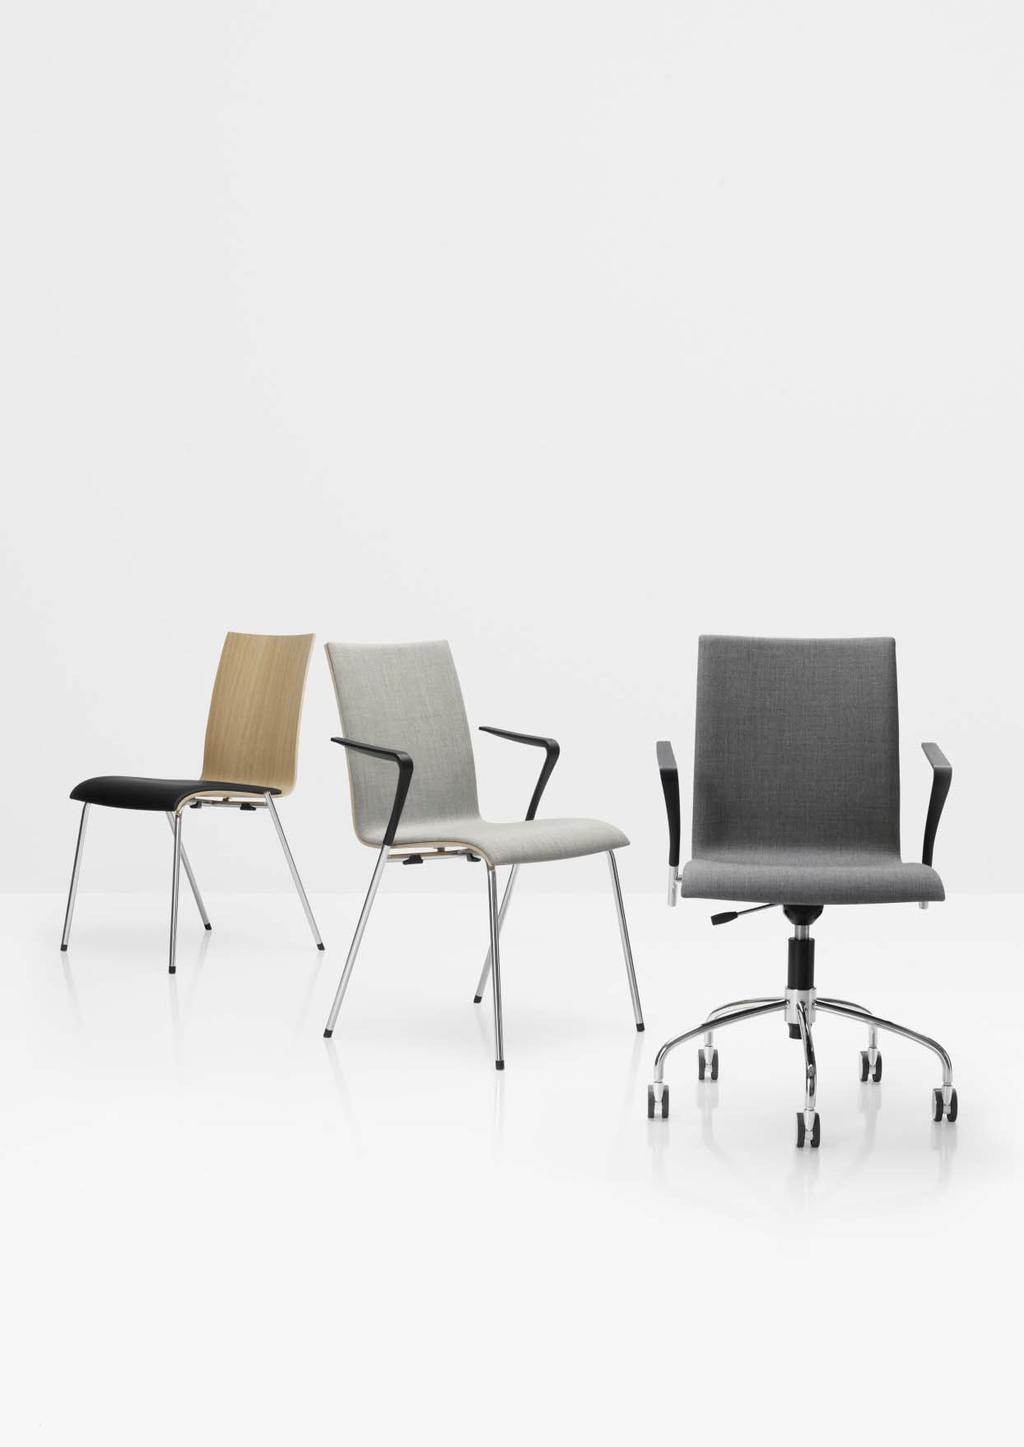 AND DESIGN ANTTI KOTILAINEN The AND collection of chairs offers versatile options for spatial designers.